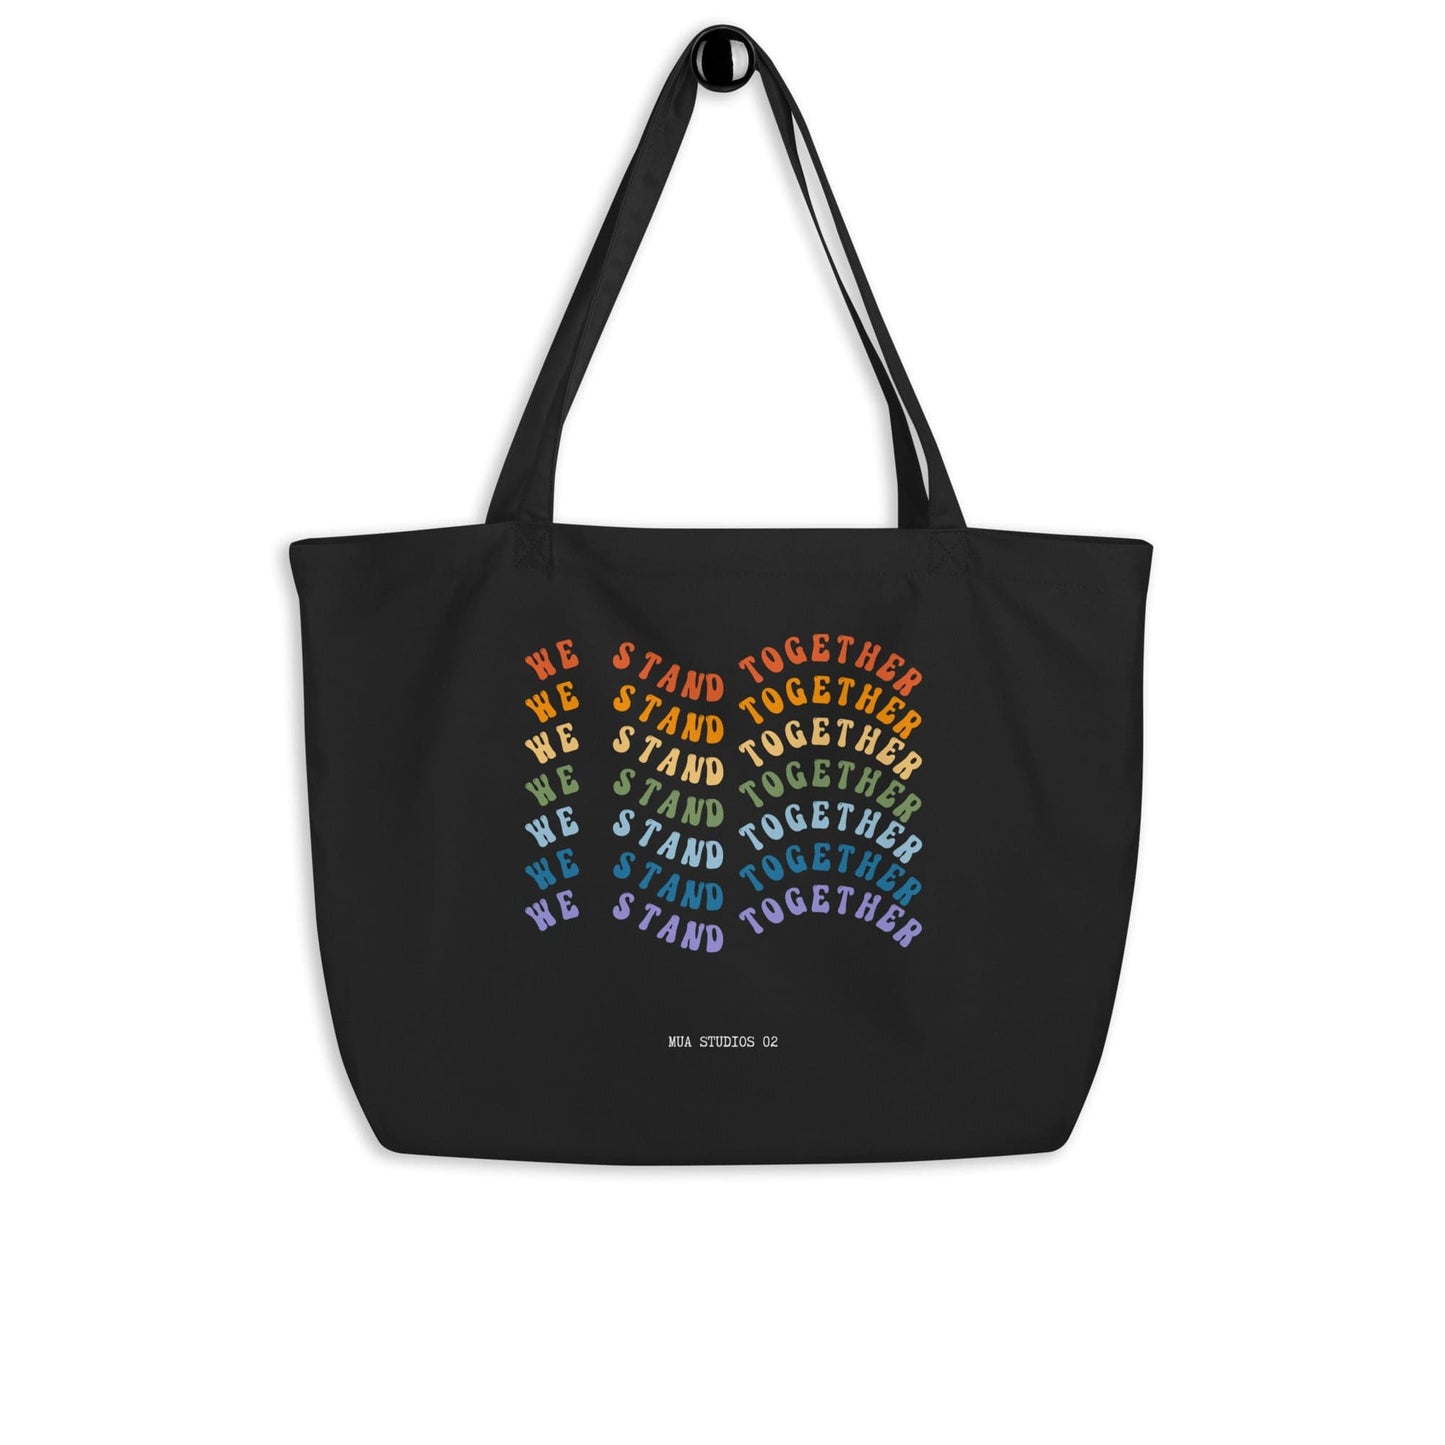 "We stand together" Large organic tote bag